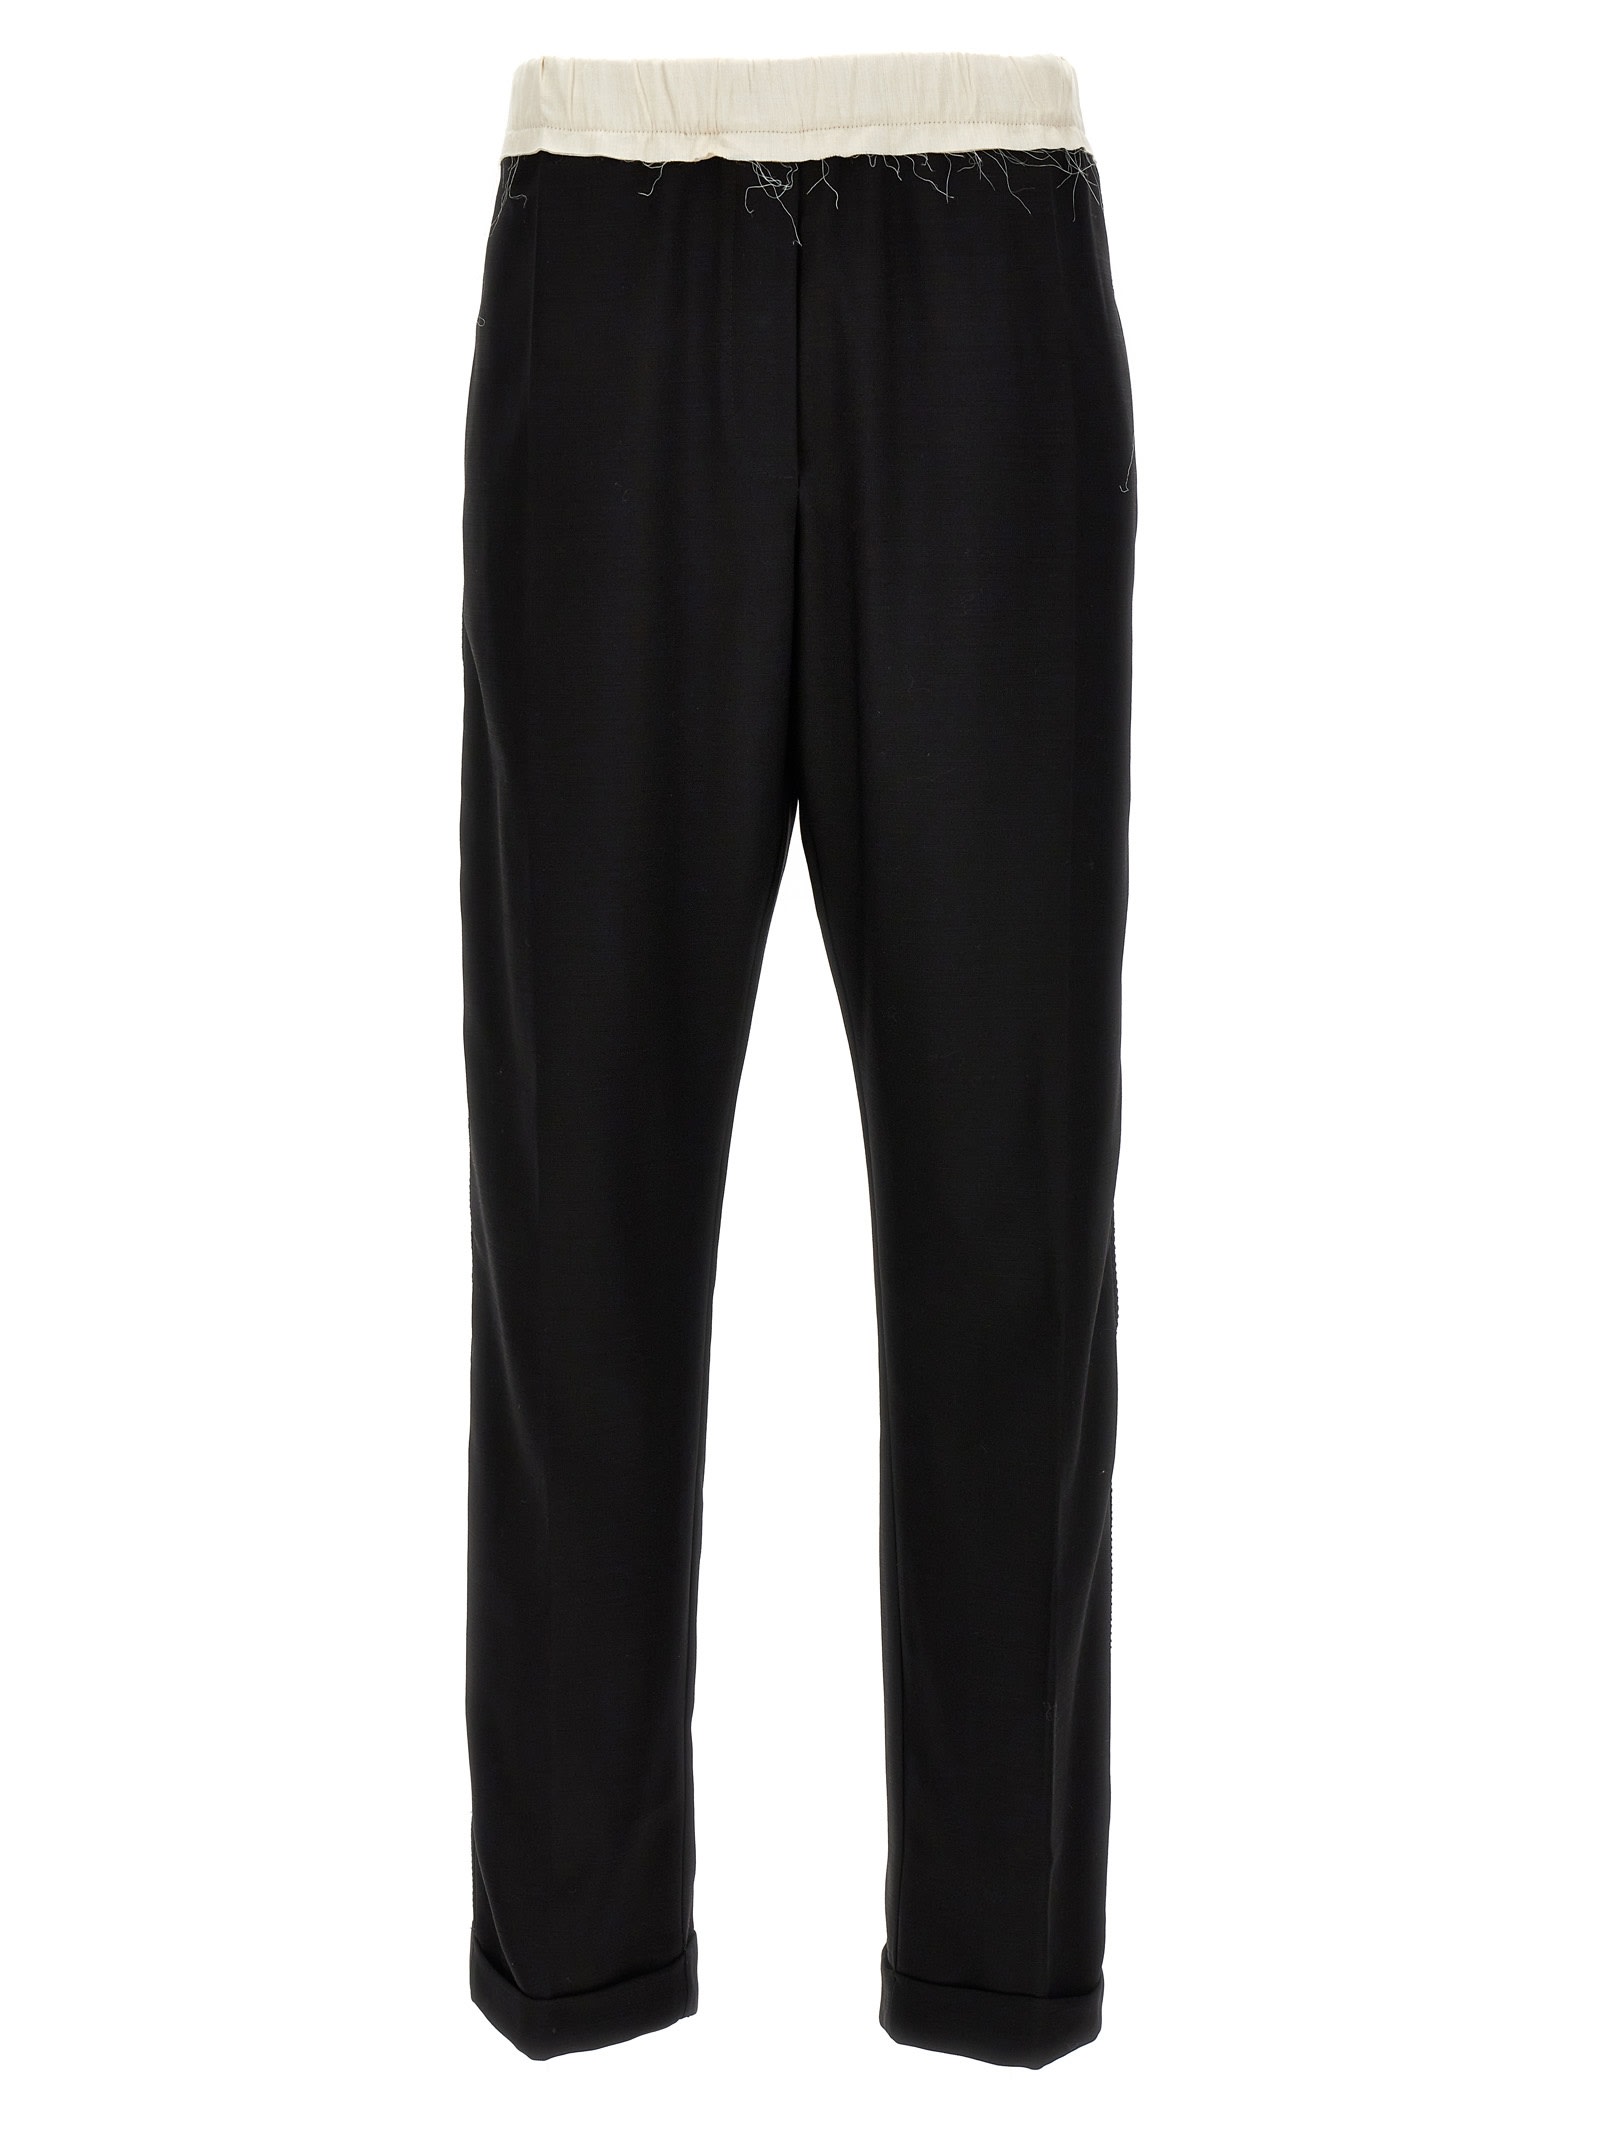 Dusk pleated cotton and cashmere pants